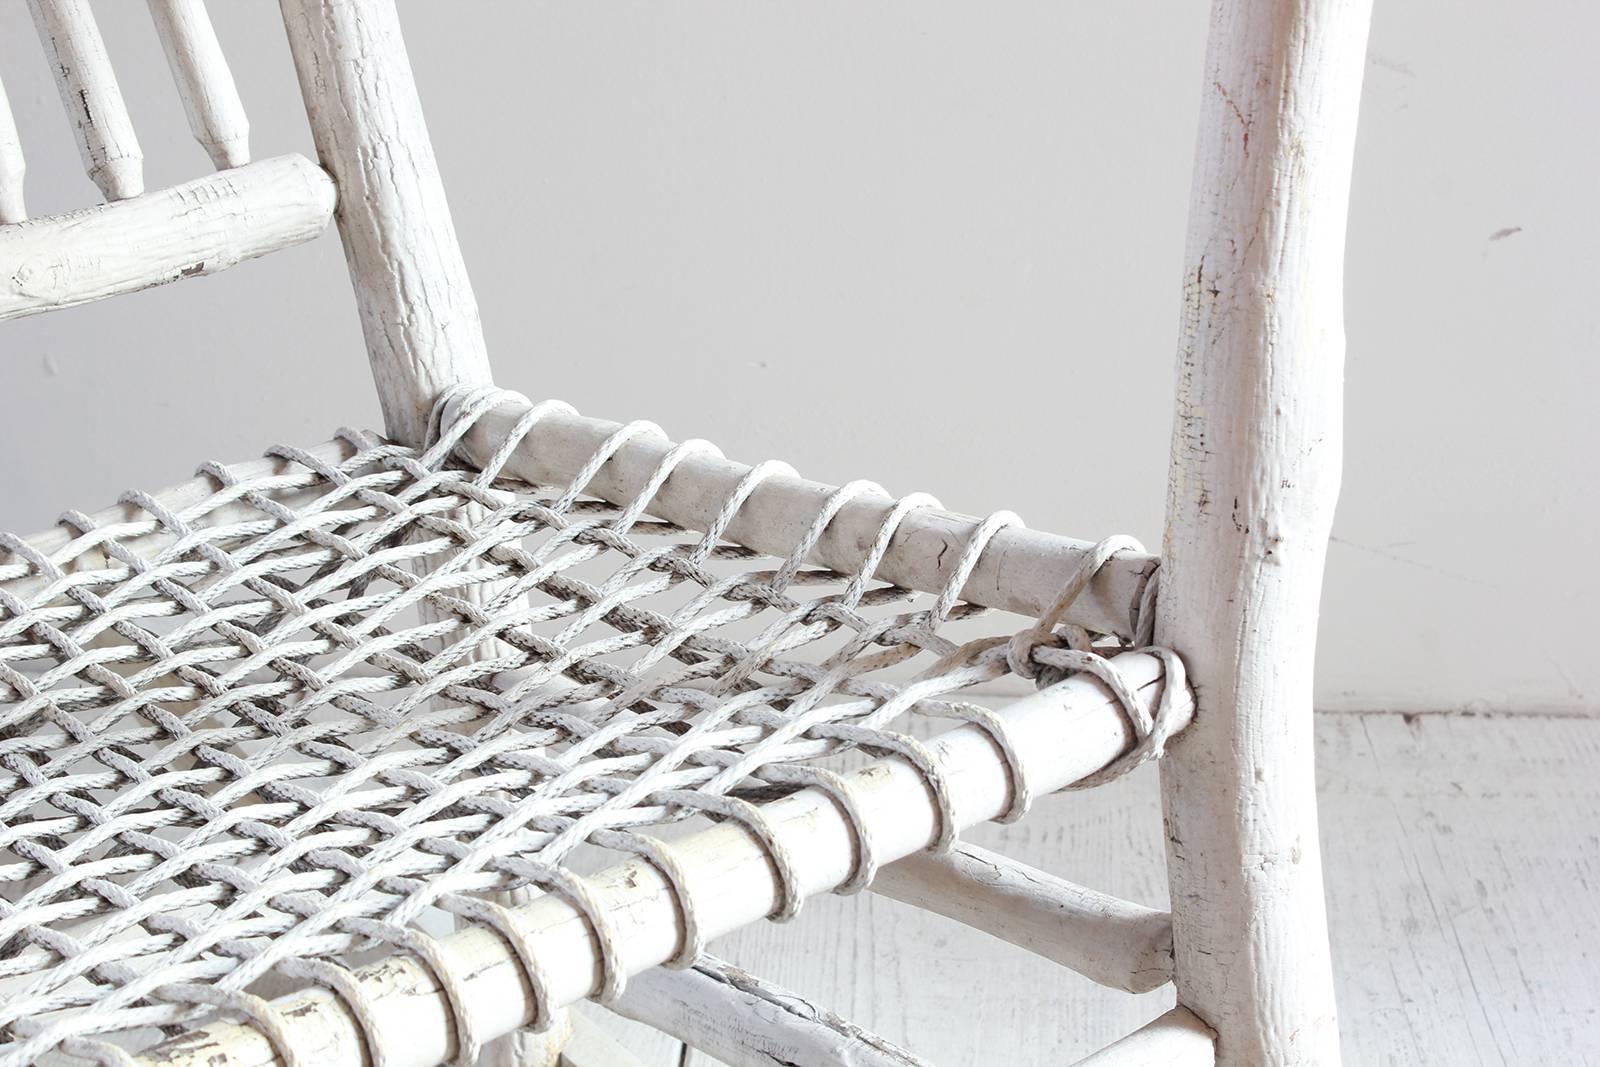 Wood Painted Rocking Chair with Rope Seat 1